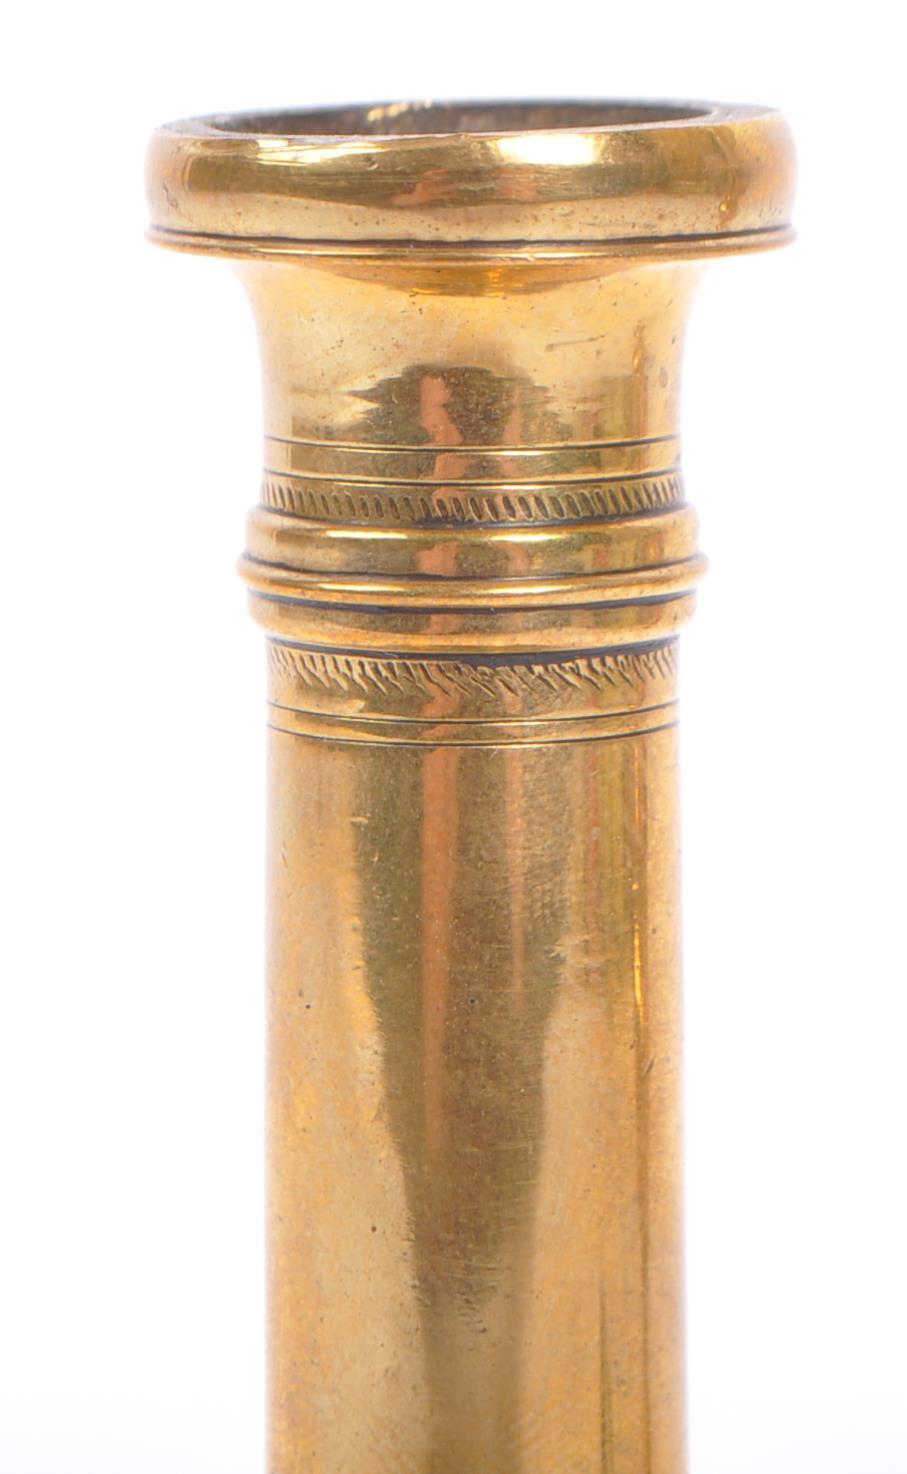 PAIR OF EARLY 20TH CENTURY BRASS ROSE WATER SHAKERS - Image 4 of 5